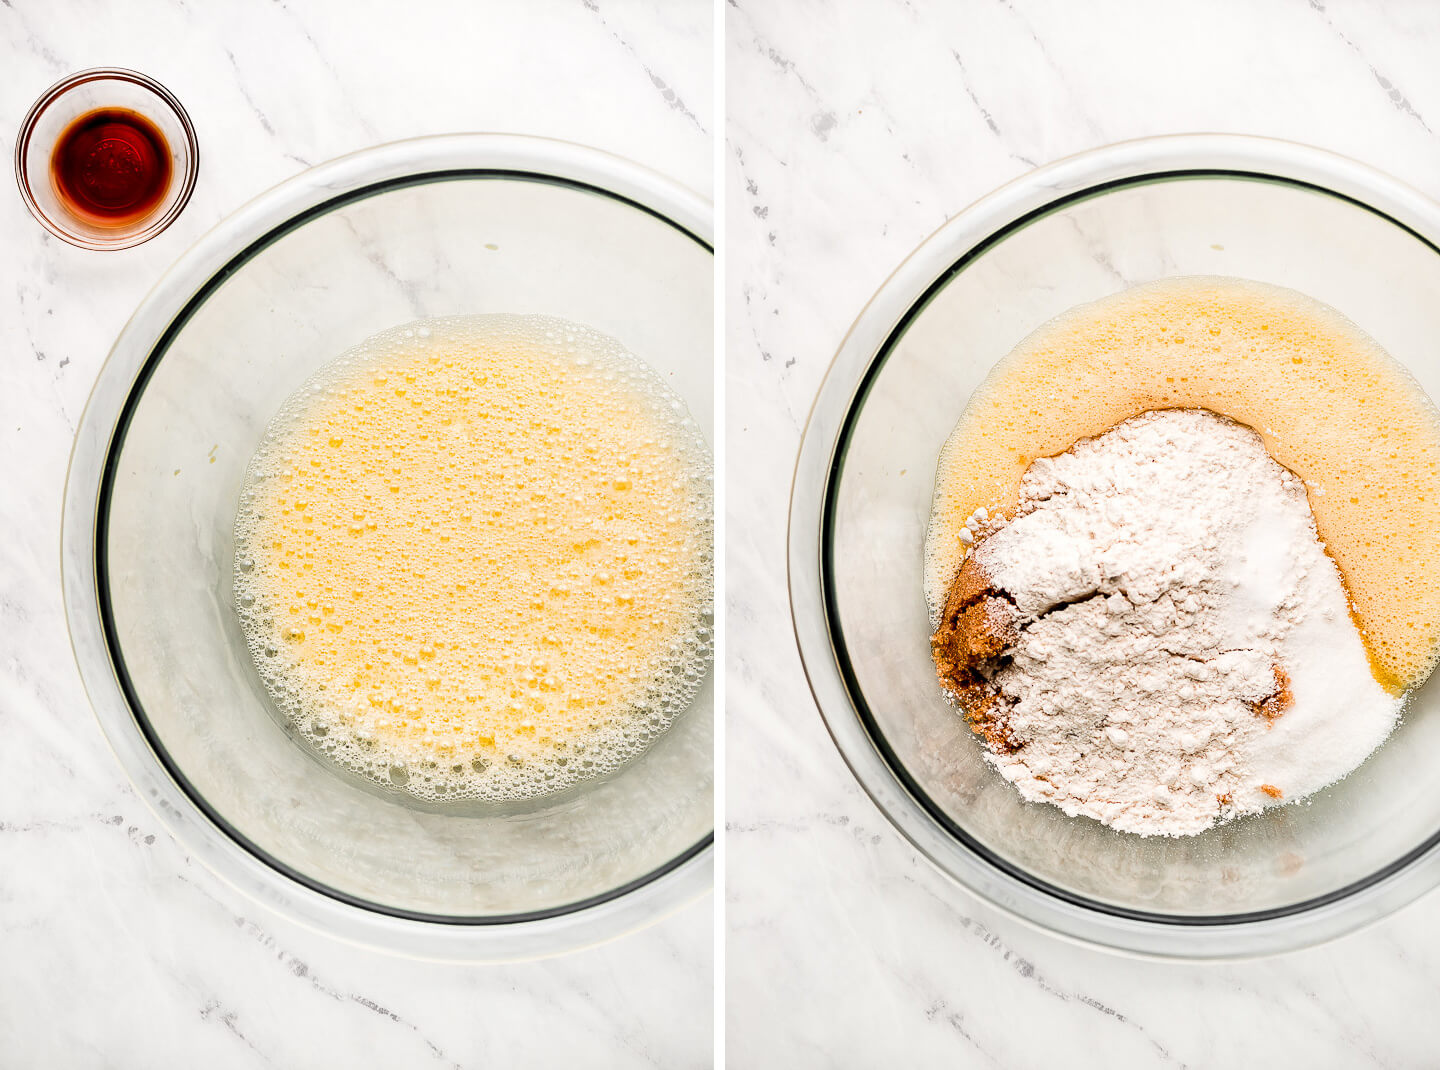 Diptych- Glass mixing bowl of beaten eggs; flour and sugars added to the frothed eggs.